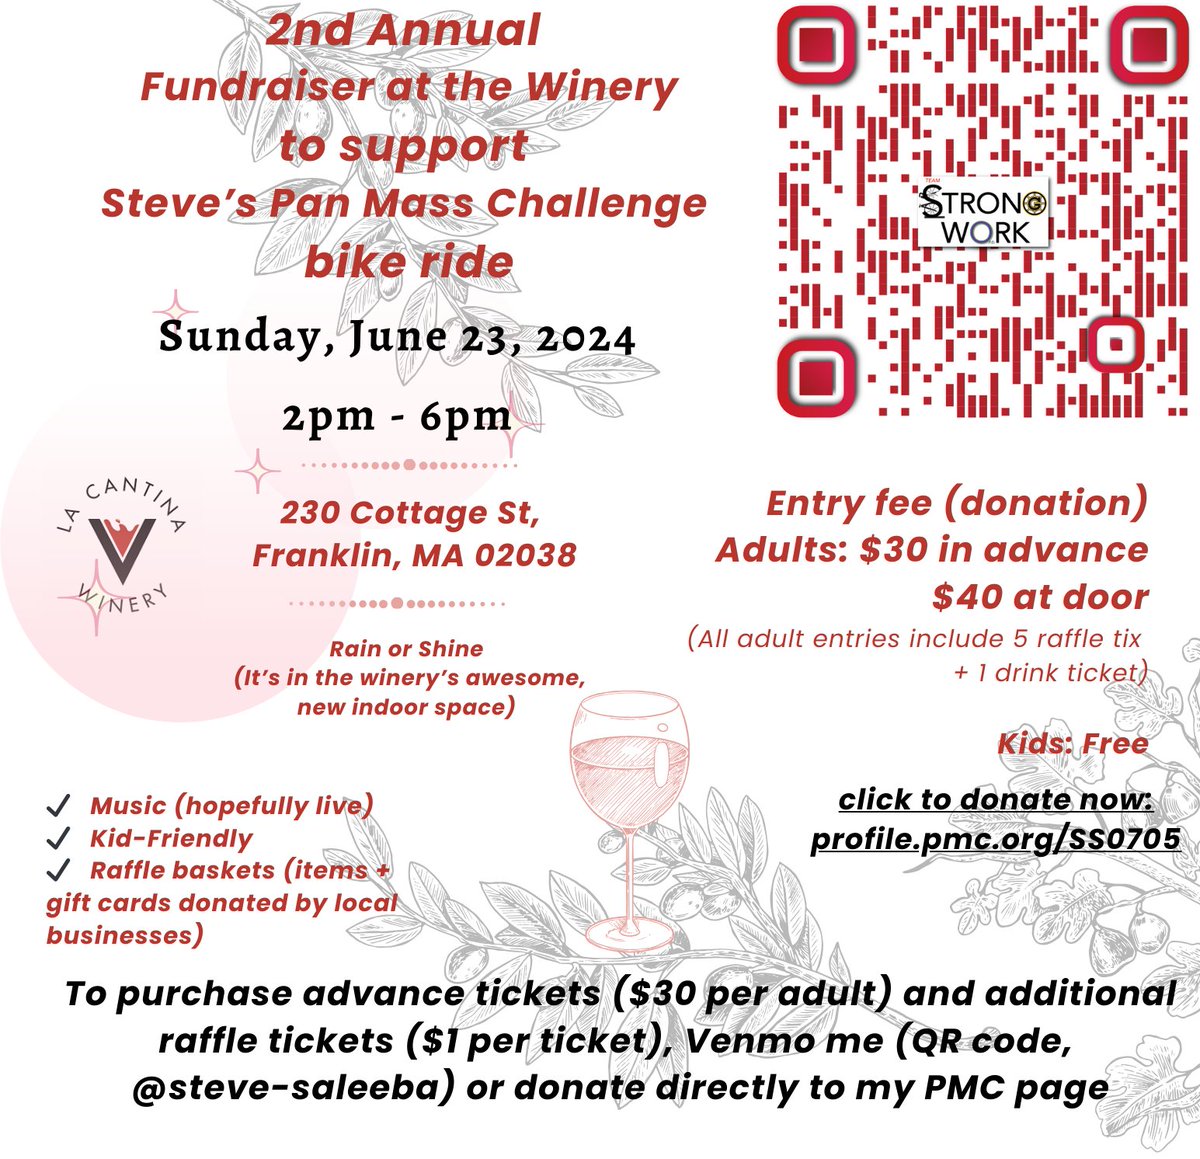 Throwing a party at La Cantina Winery in Franklin, Mass. to raise donation money for my @PanMass ride. I'm inviting all of you! Pay in advance to save $10. FAQ: How do I pay? Venmo me (@ steve-saleeba) or donate straight to my PMC page: profile.pmc.org/SS0705